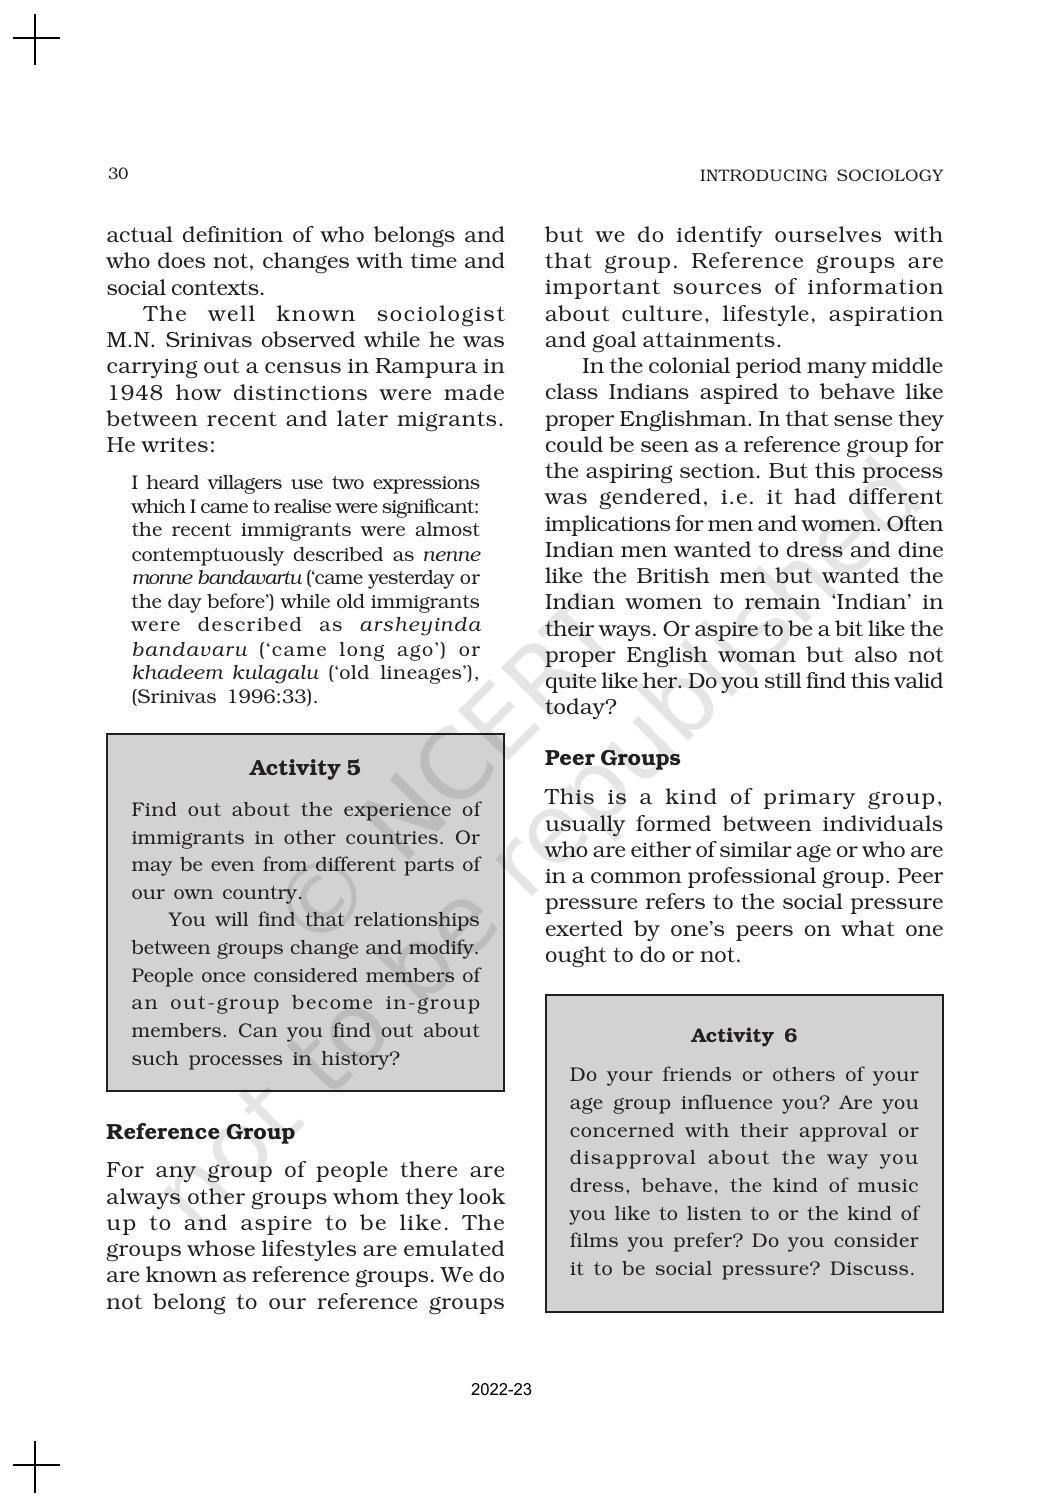 NCERT Book for Class 11 Sociology (Part-I) Chapter 2 Terms, Concepts and Their Use in Sociology - Page 7